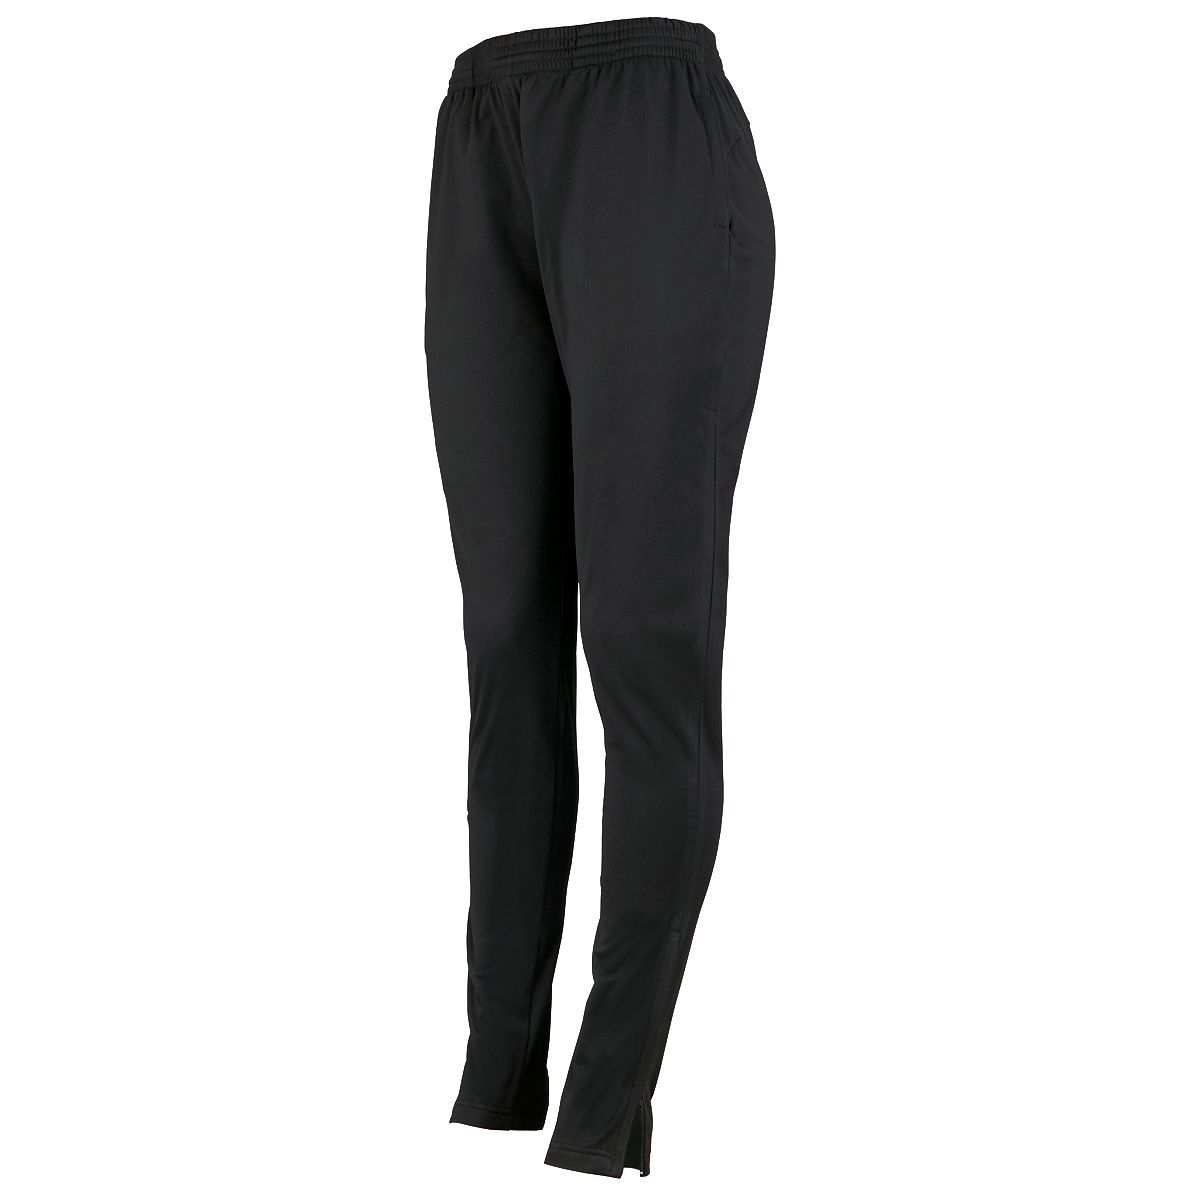 Augusta Sportswear Ladies Tapered Leg Pant in Black  -Part of the Ladies, Ladies-Pants, Pants, Augusta-Products product lines at KanaleyCreations.com